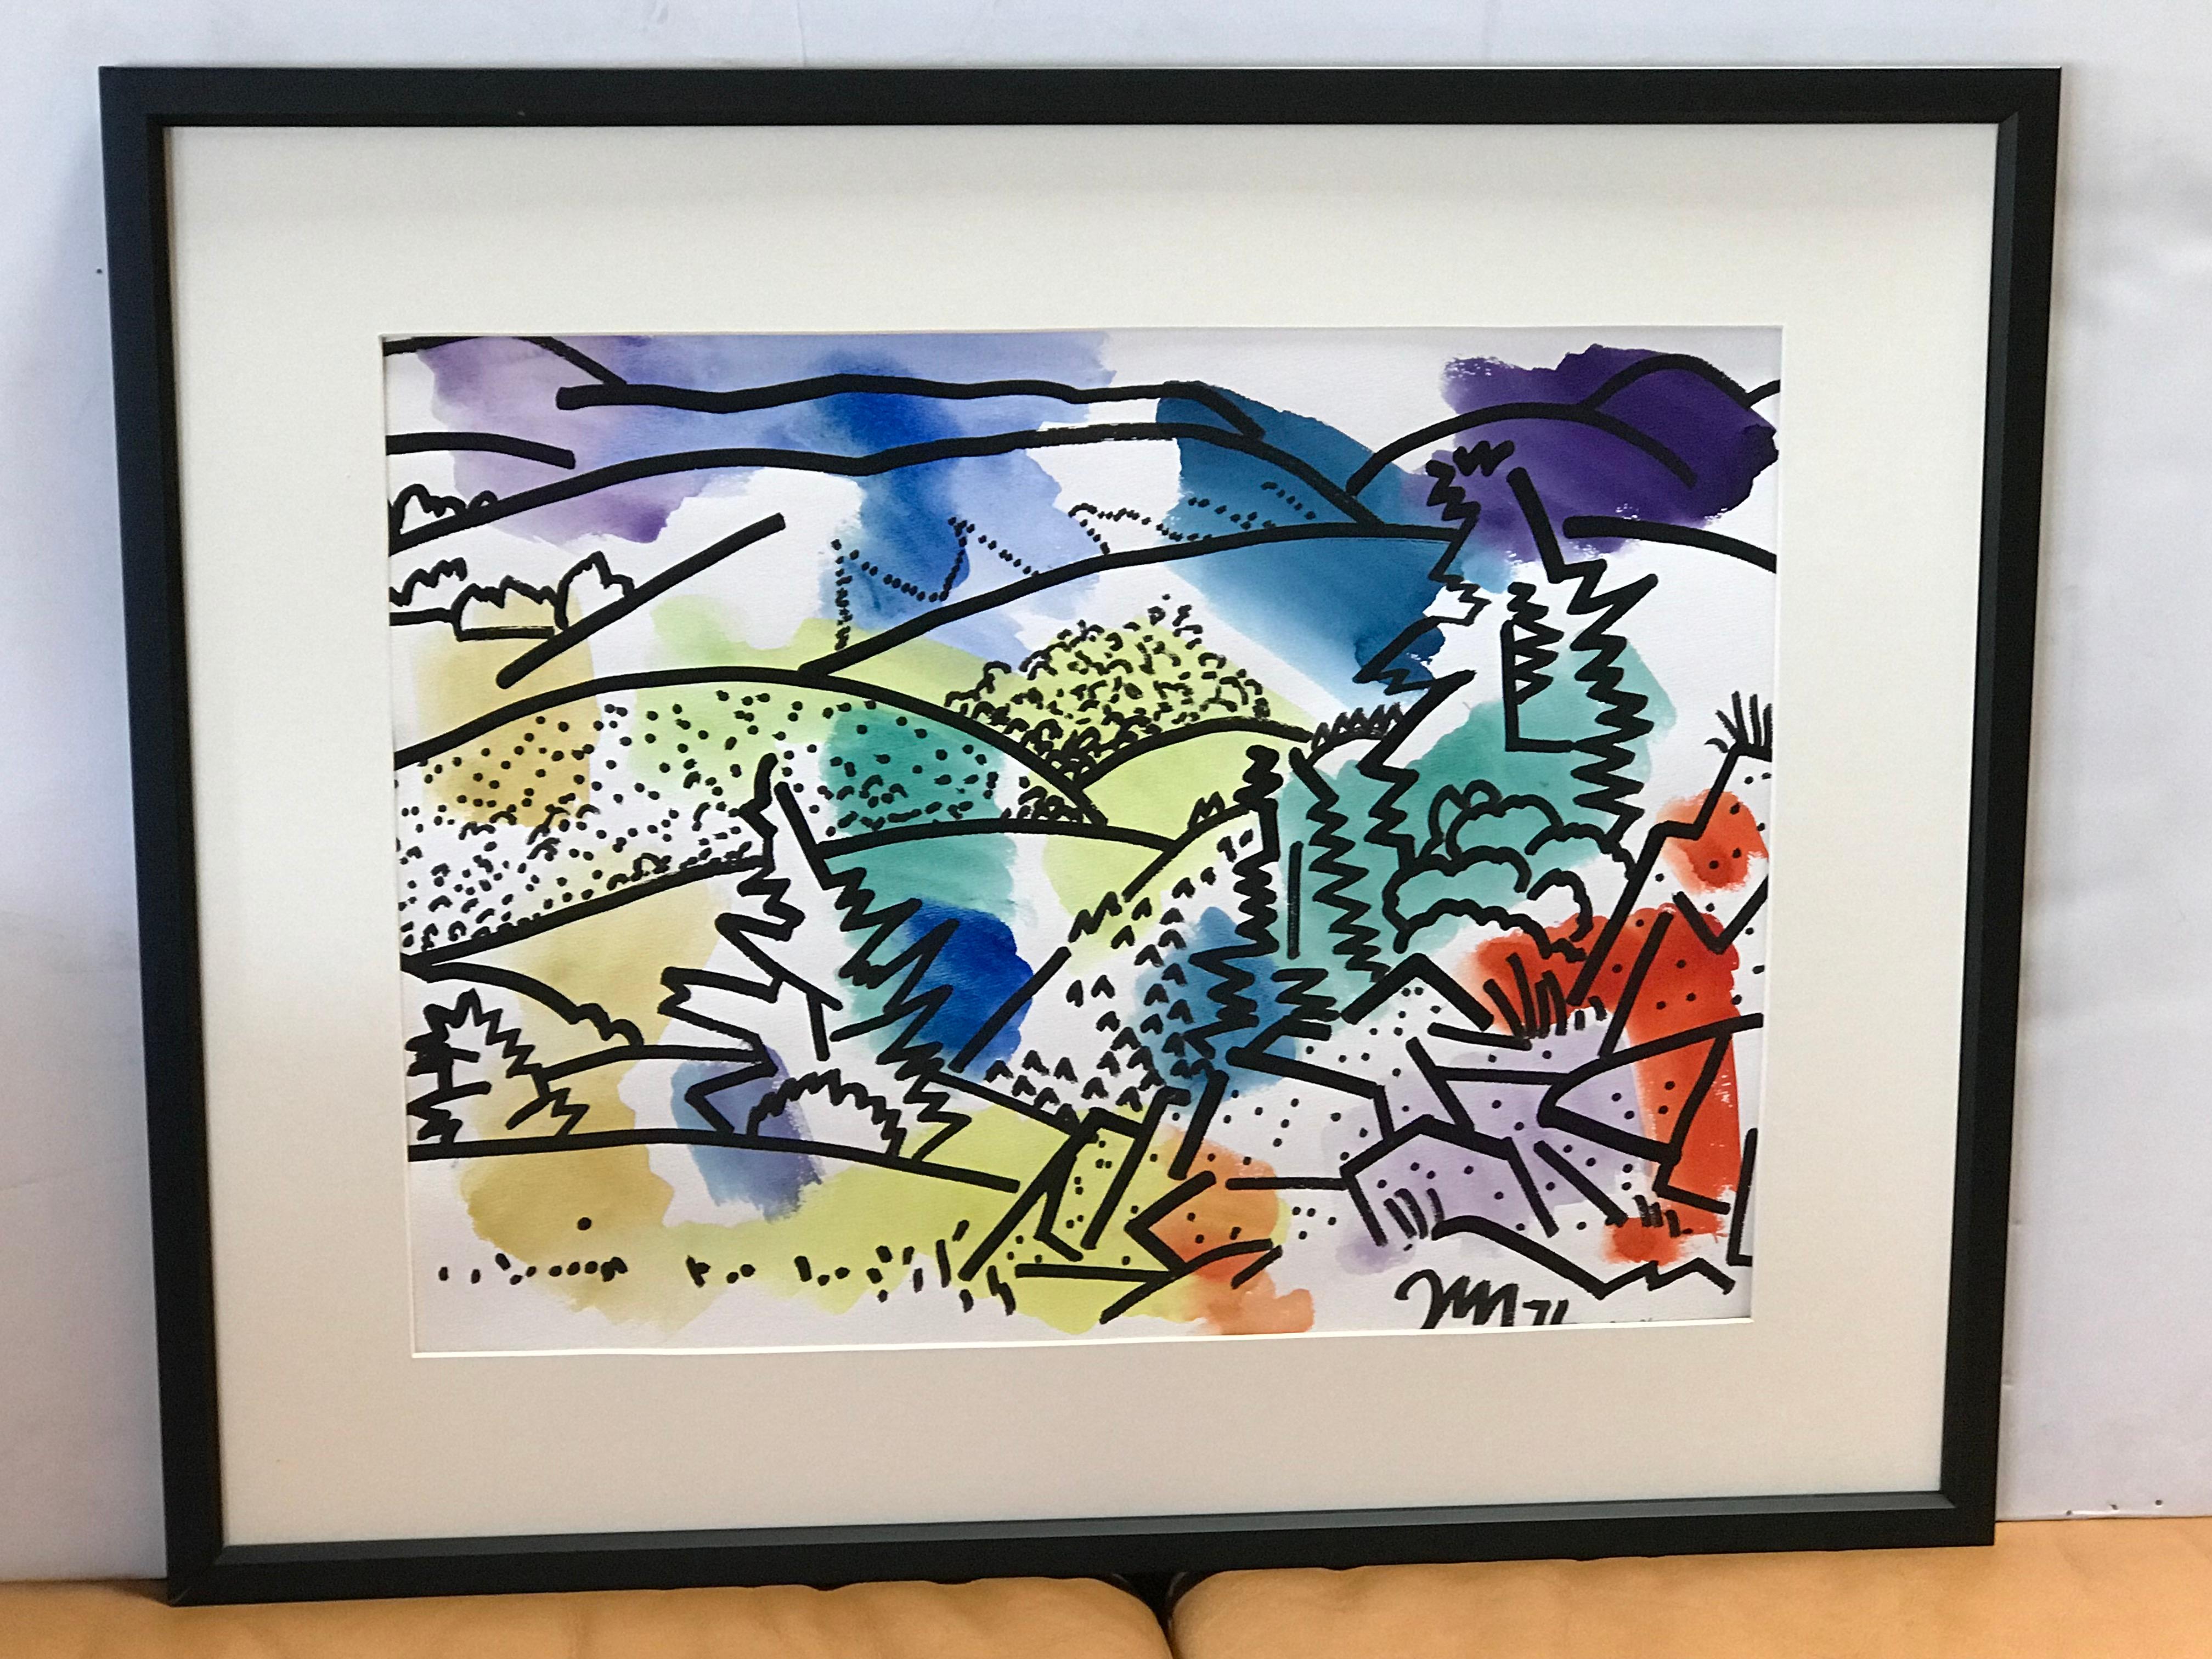 Framed colorful landscape watercolor by James McCray (1912-1993), signed by the artist and dated 1976.
McCray taught at the California School of Fine Arts in San Francisco during the 1940's. He had solo and group exhibitions from 1935-1966. Among